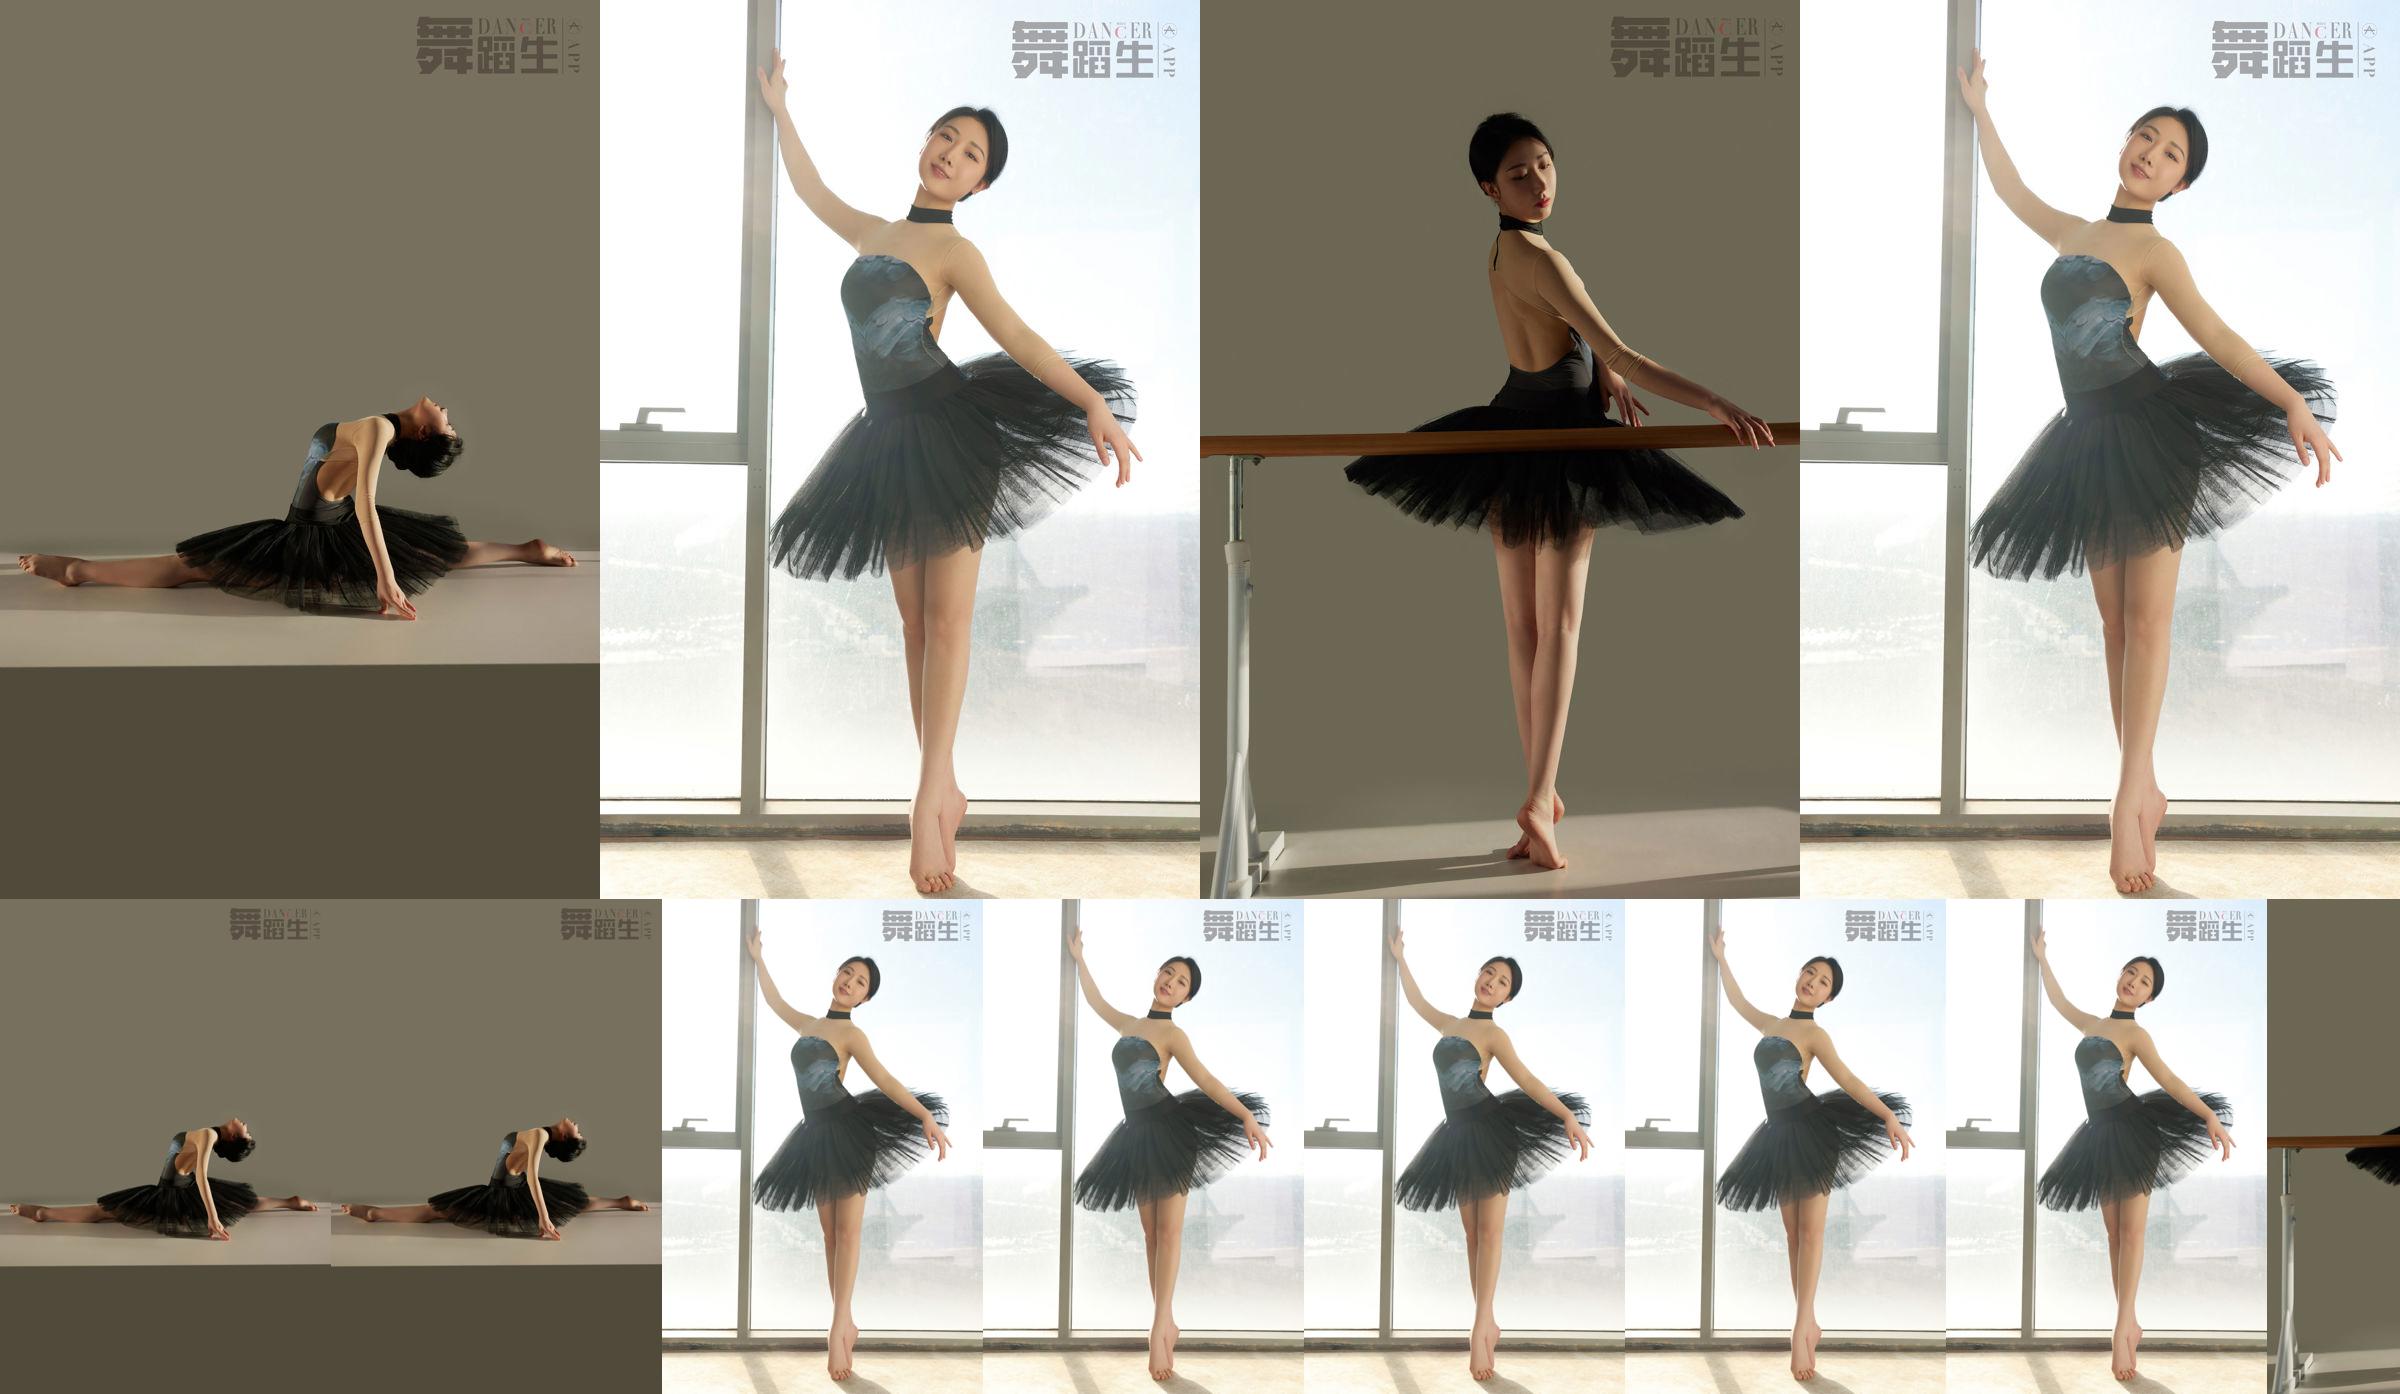 [Carrie Galli] Diary of a Dance Student 088 Xue Hui No.9521b4 Page 2